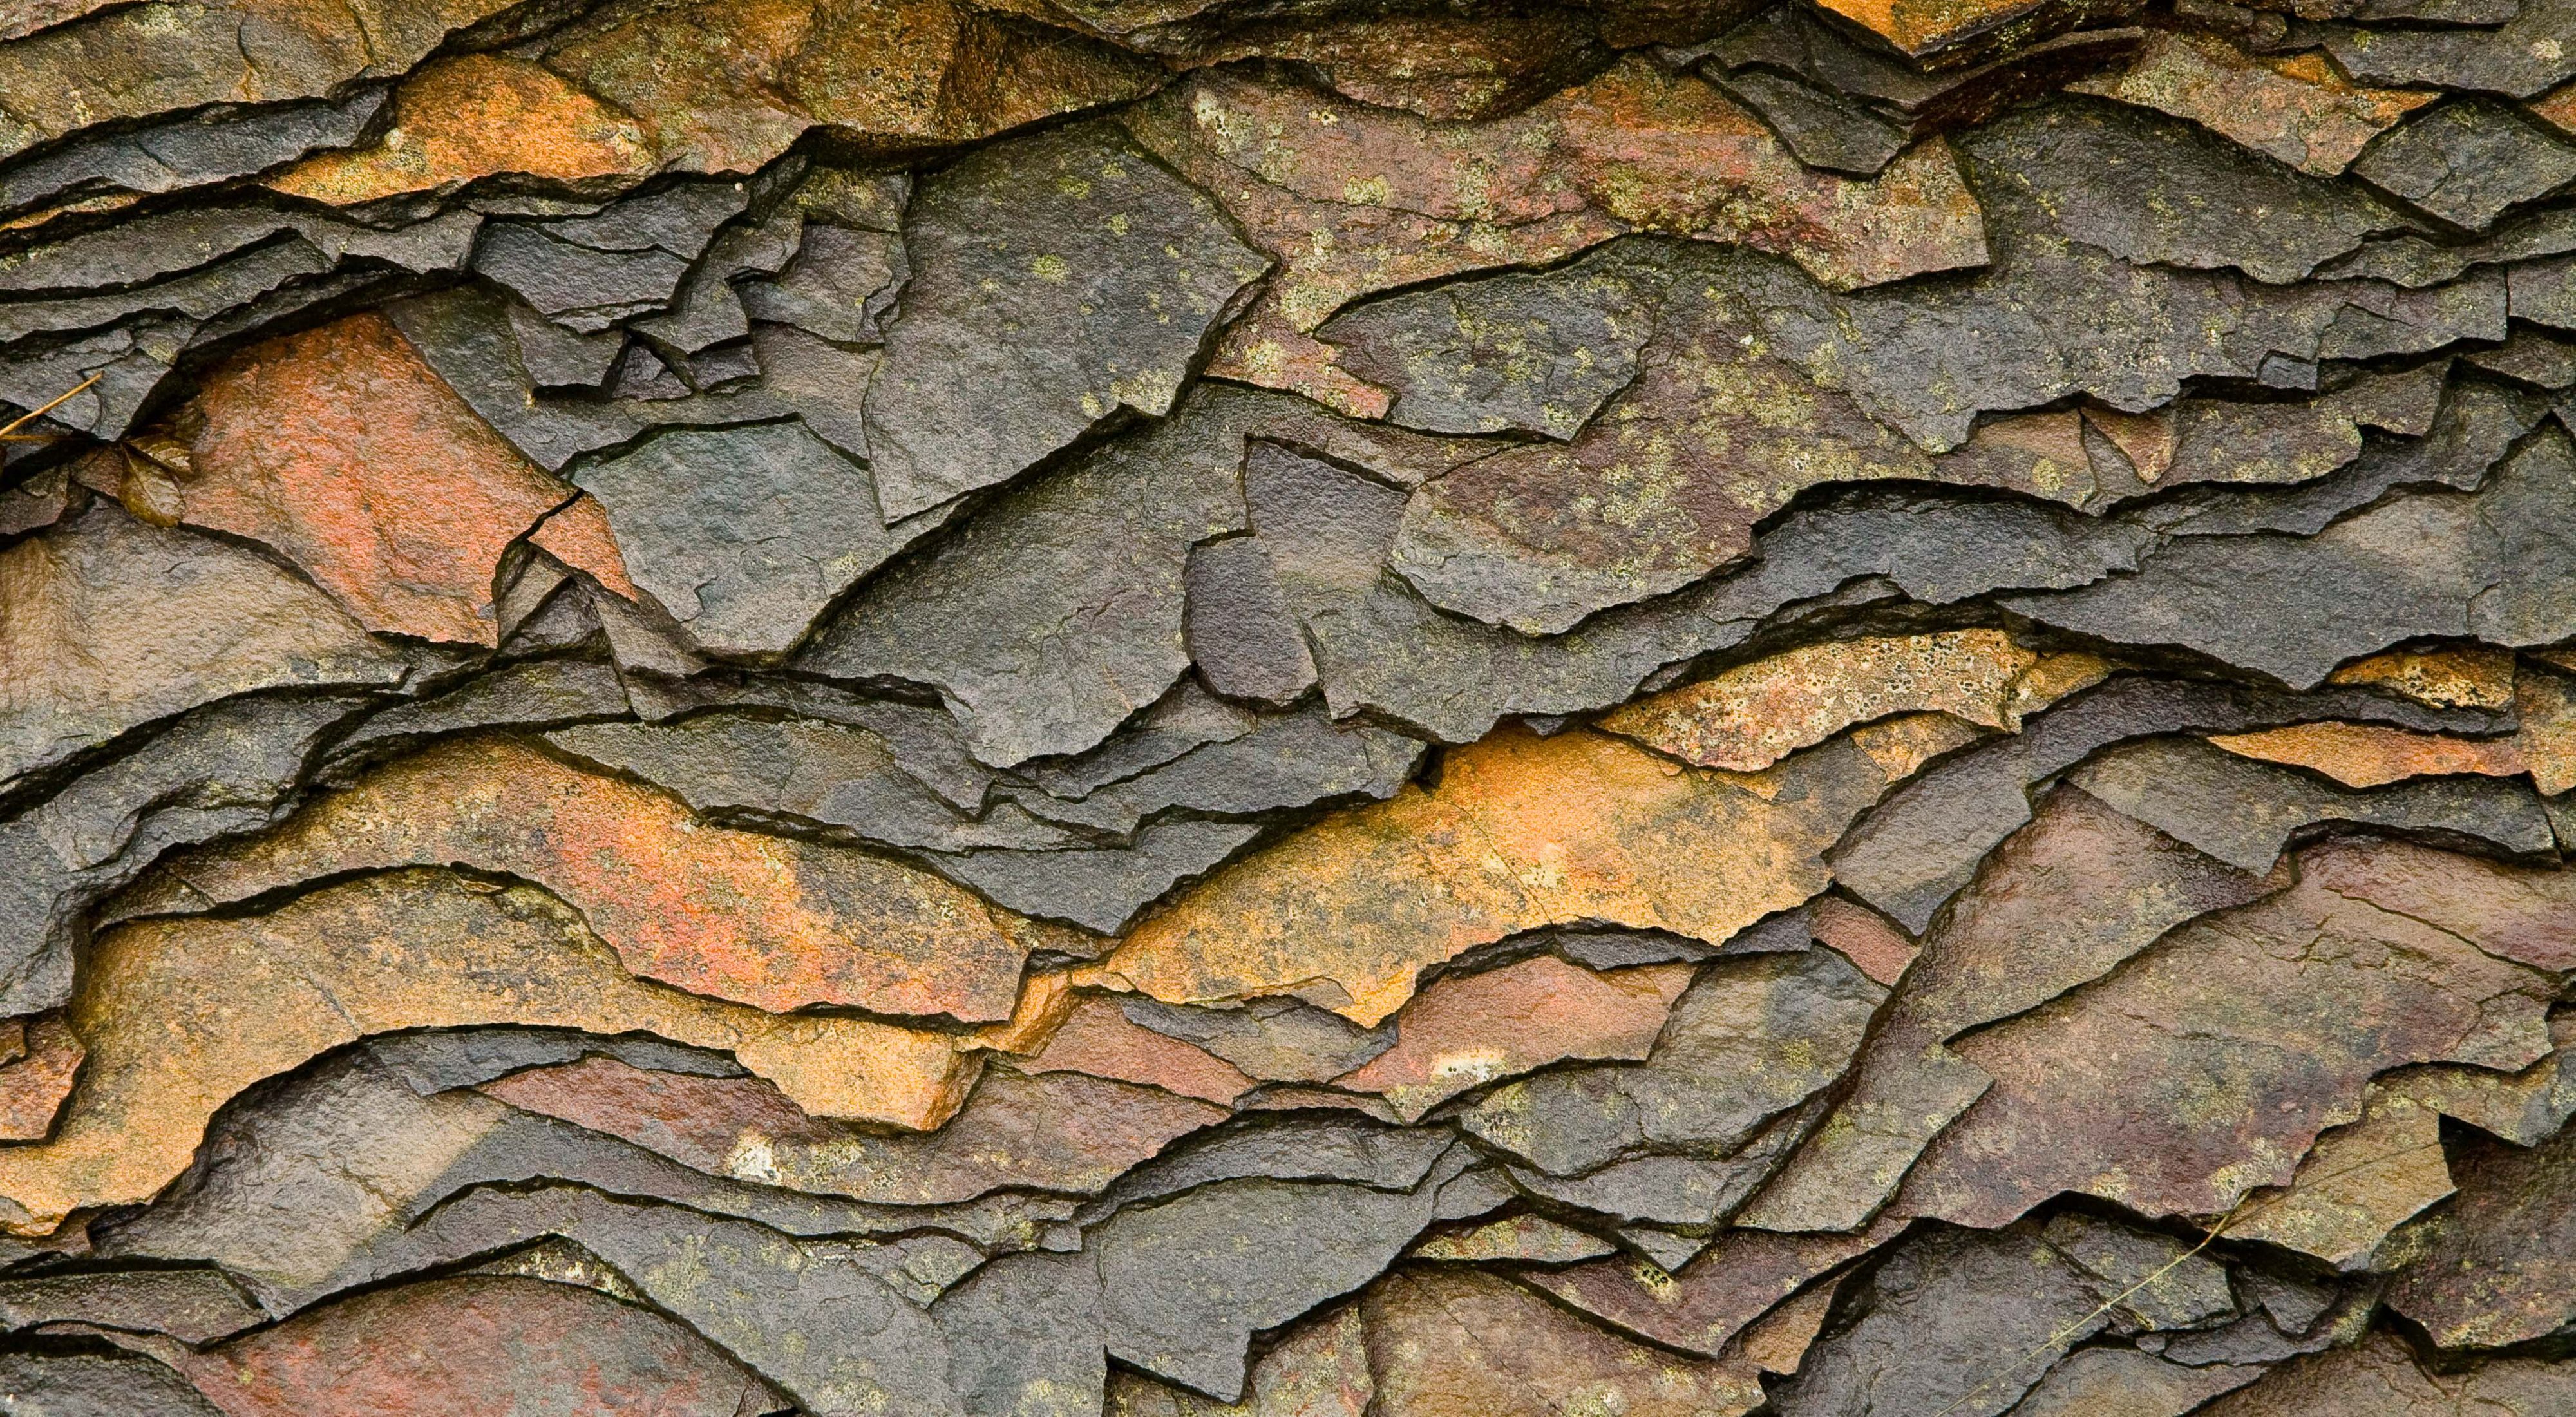 Weathered and stained shale at Blackwater Falls State Park in West Virginia.